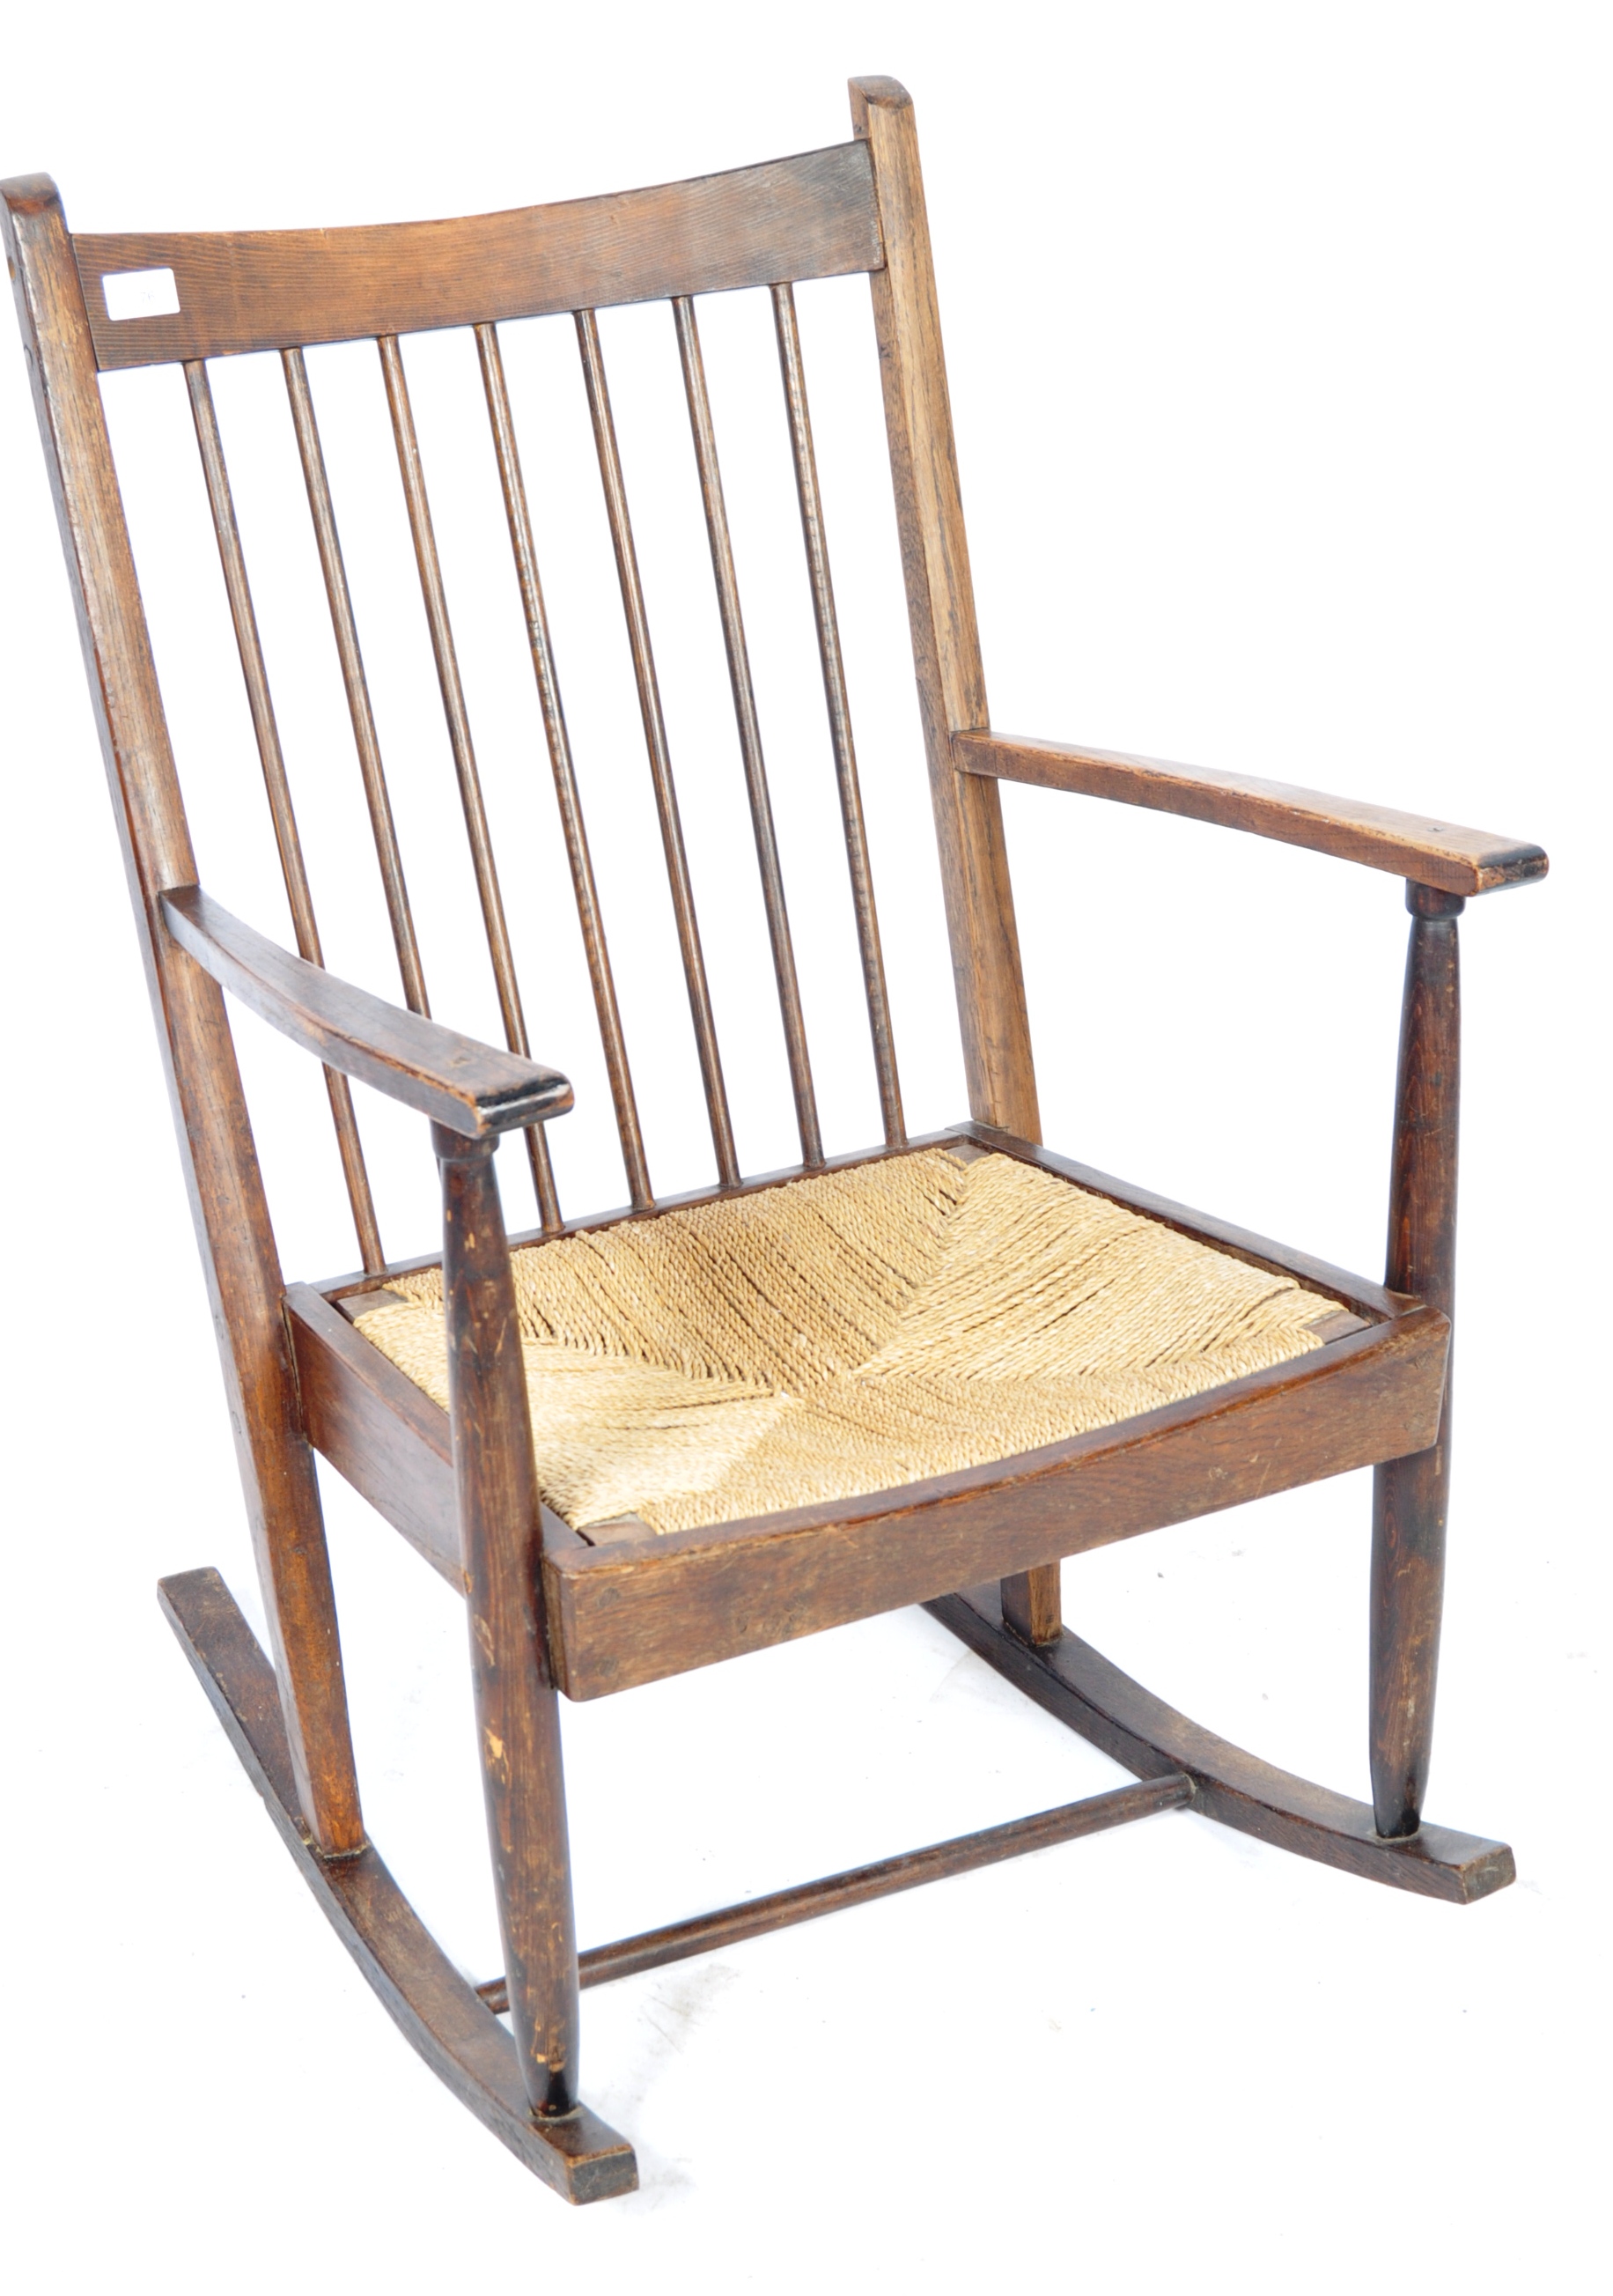 EARLY TO MID 20TH CENTURY BESPOKE MADE OAK ROCKING CHAIR - Image 2 of 5